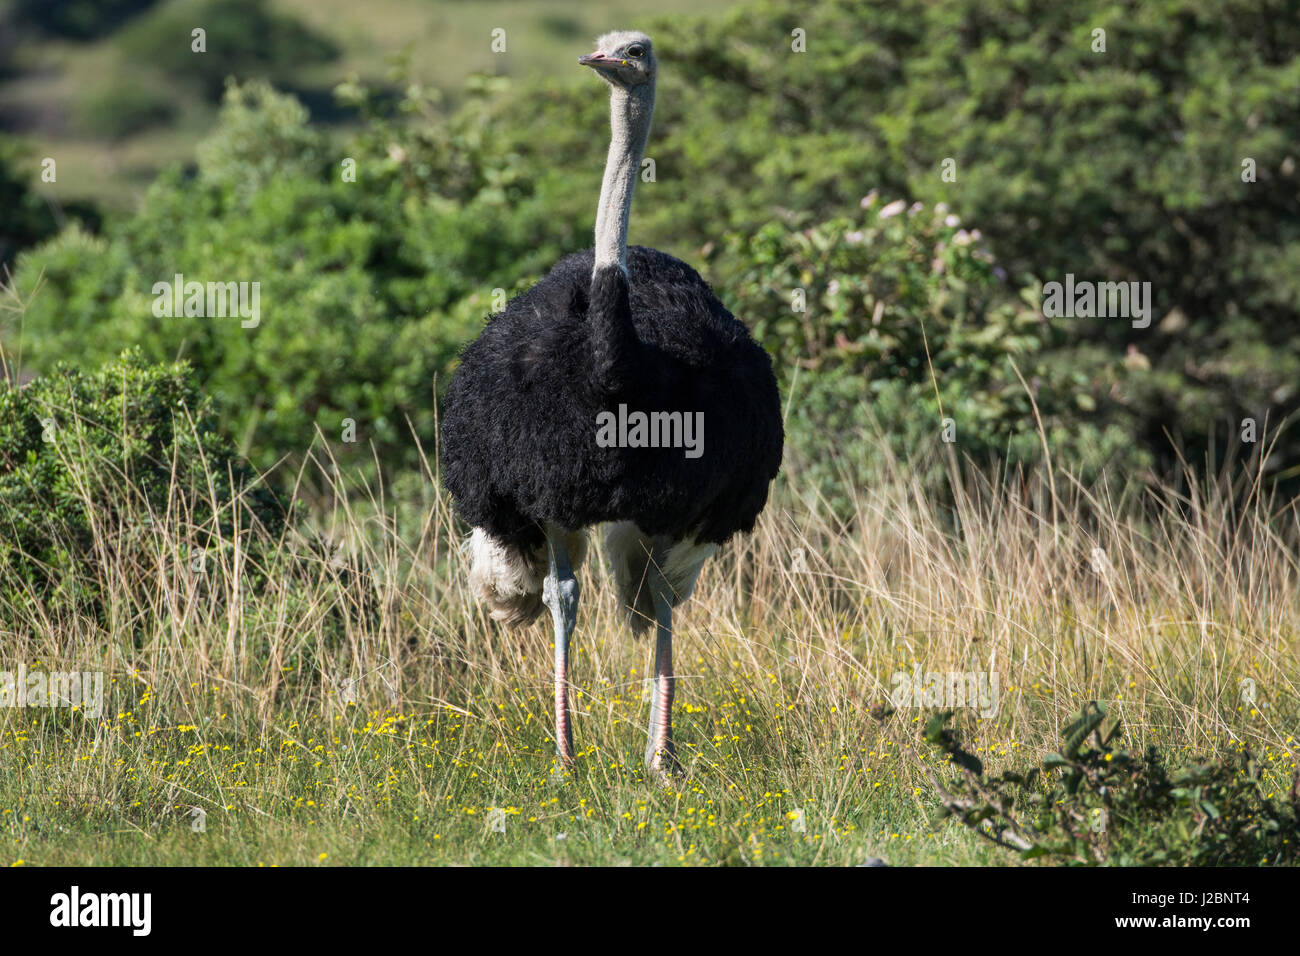 South Africa, Eastern Cape, East London. Inkwenkwezi Game Reserve. Ostrich (Struthio camelus), male in grassland habitat. Stock Photo